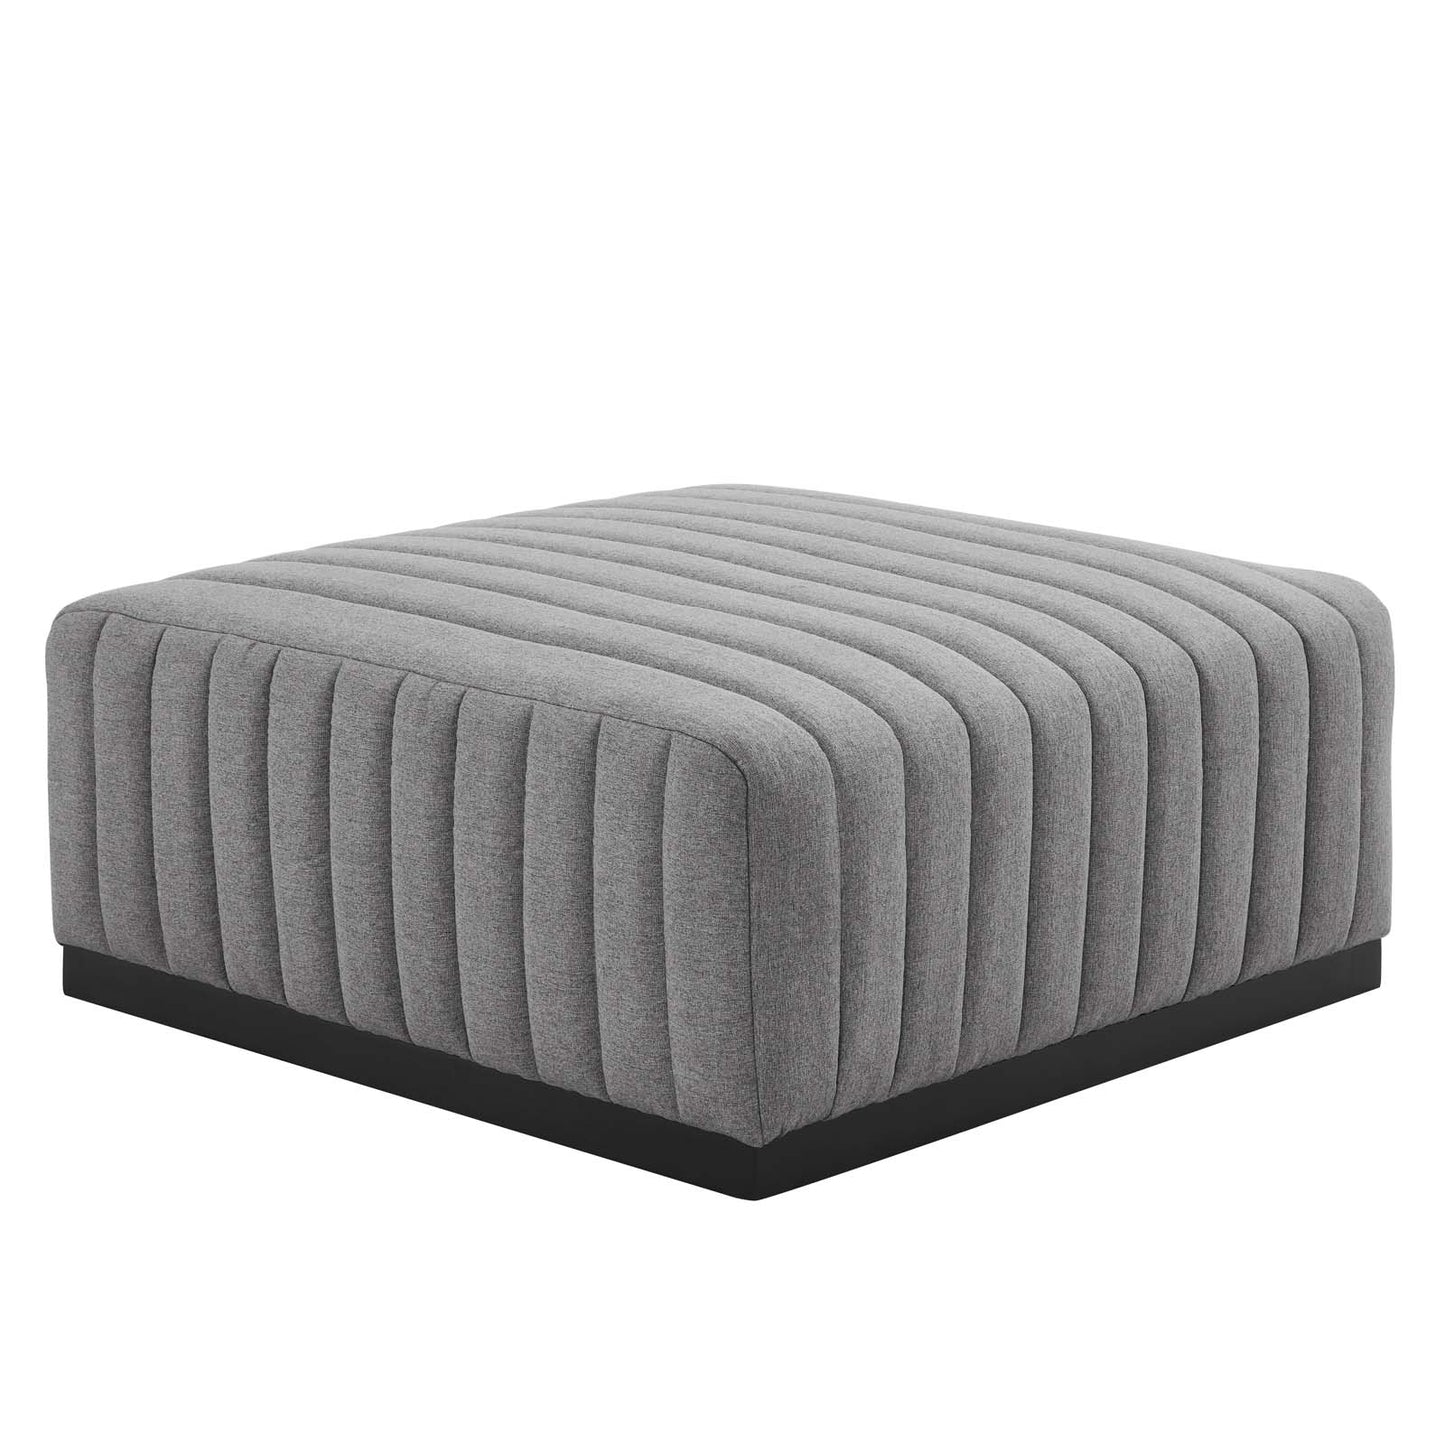 Conjure Channel Tufted Upholstered Fabric Ottoman Black Light Gray EEI-5501-BLK-LGR